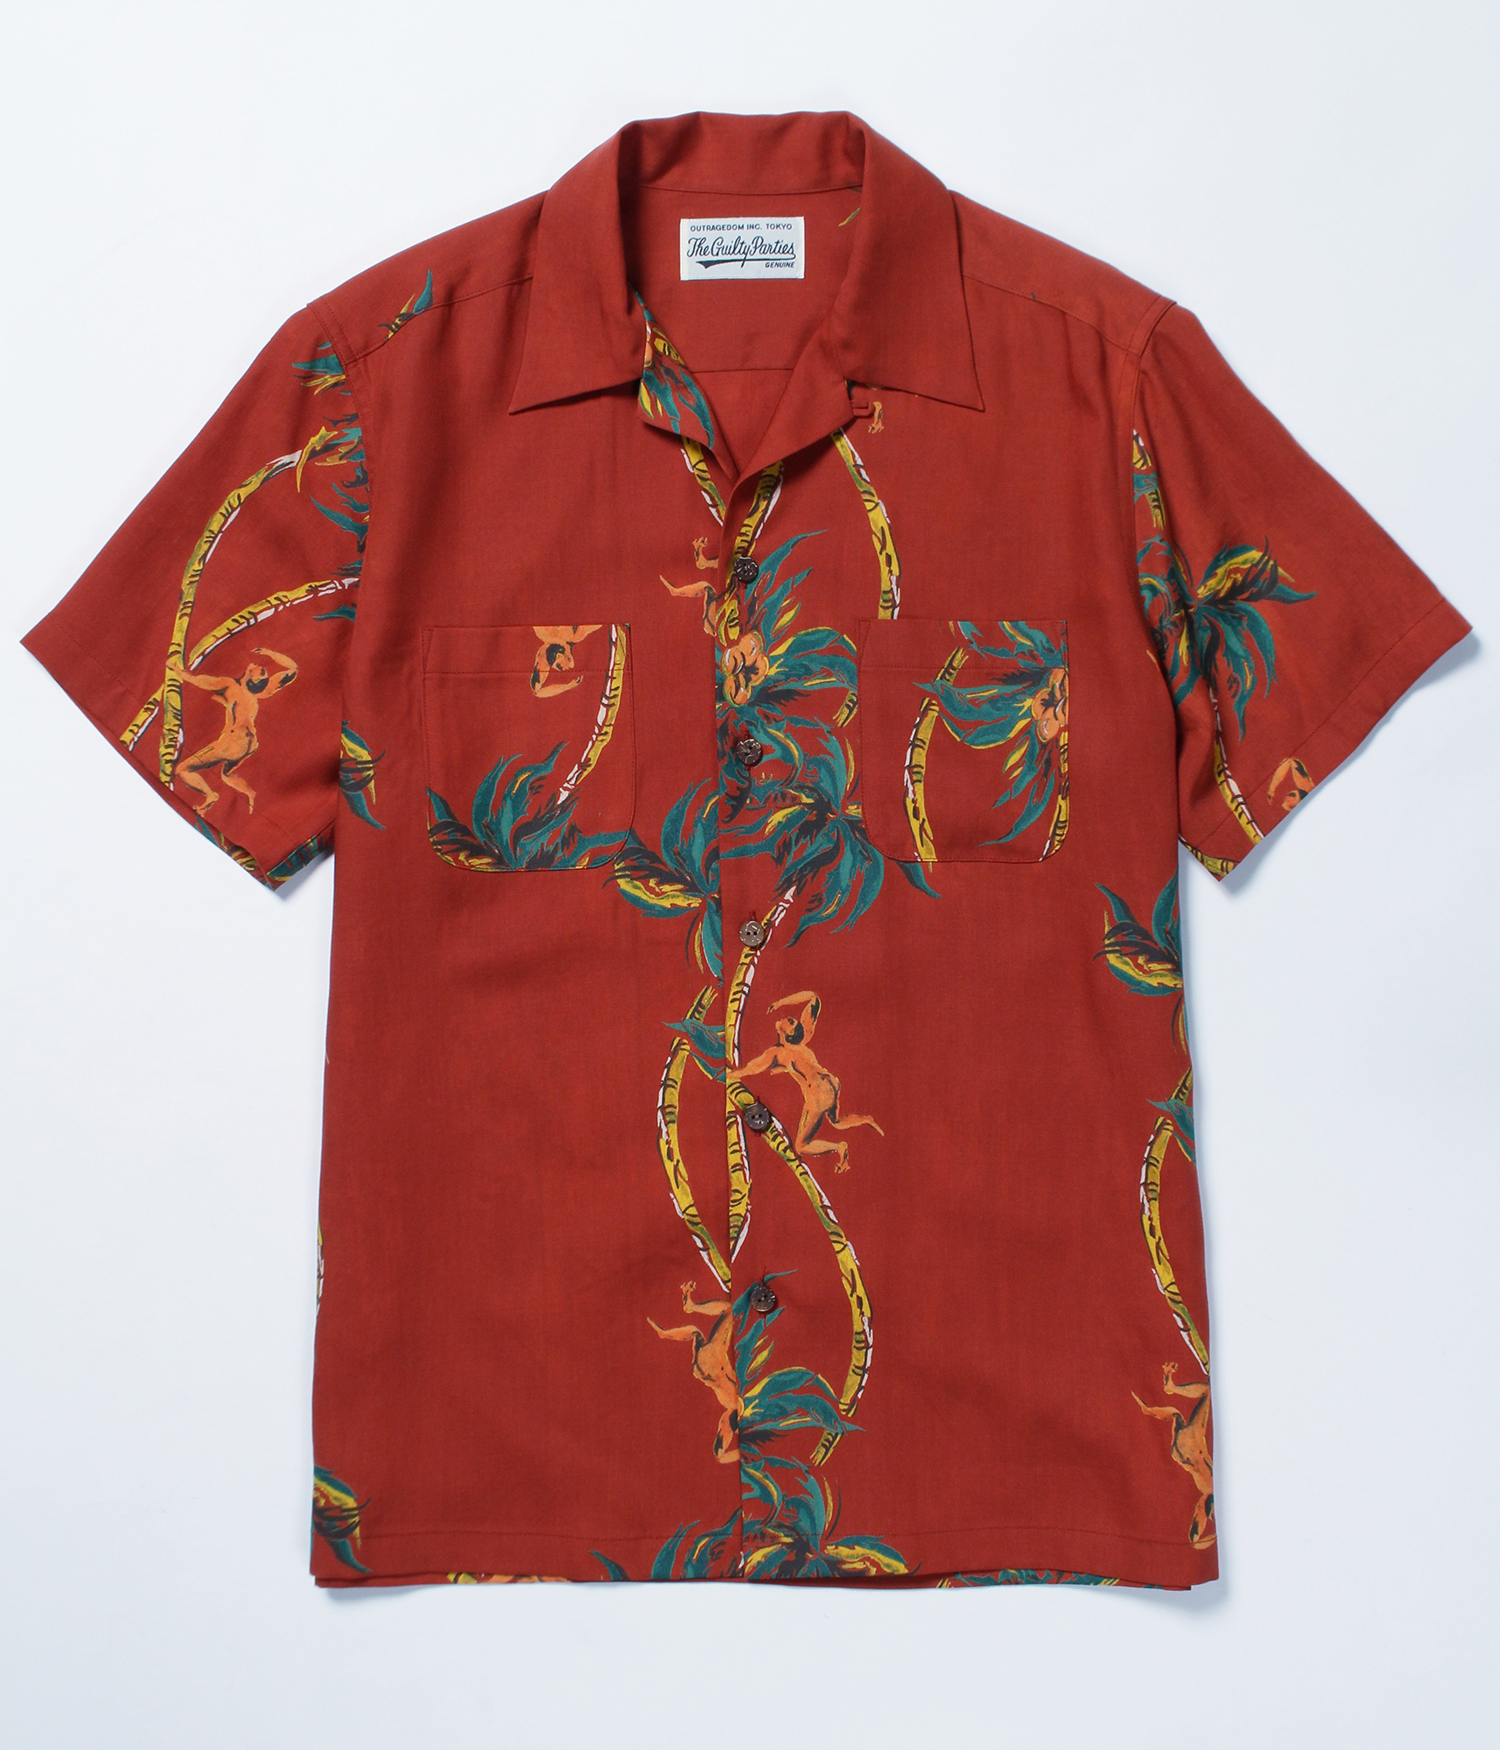 RELAX – (R)evolution » Blog Archive » 6/16 WACKO MARIA / NEW ARRIVAL